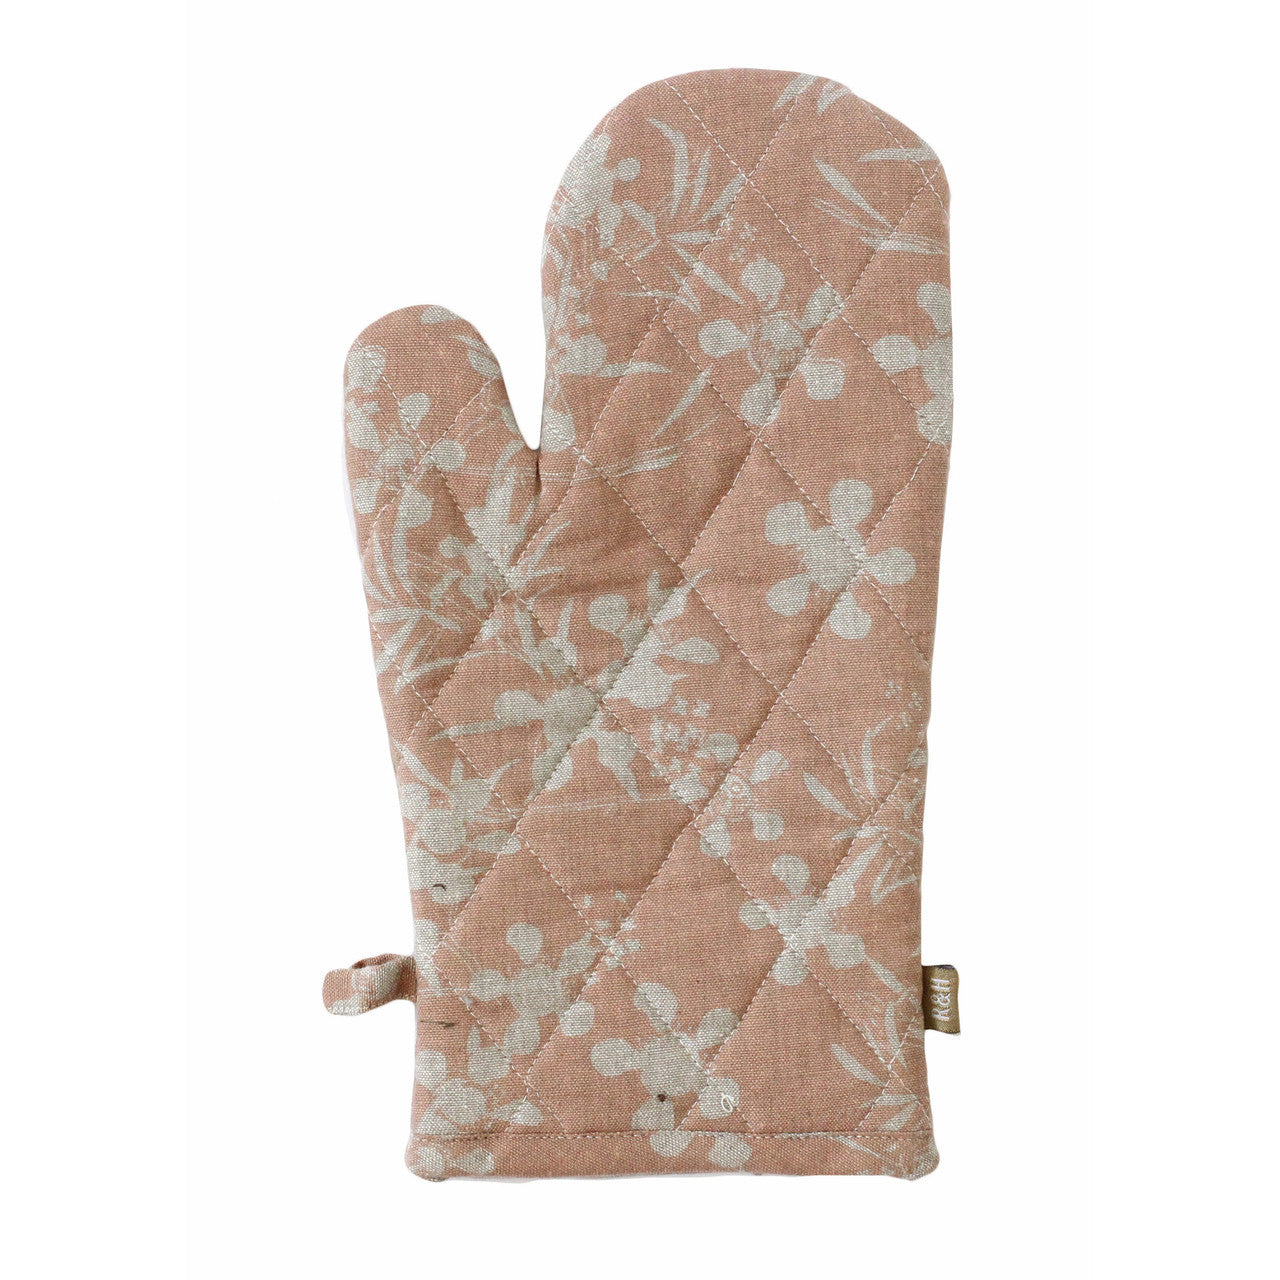 clay oven mitt on a white background.